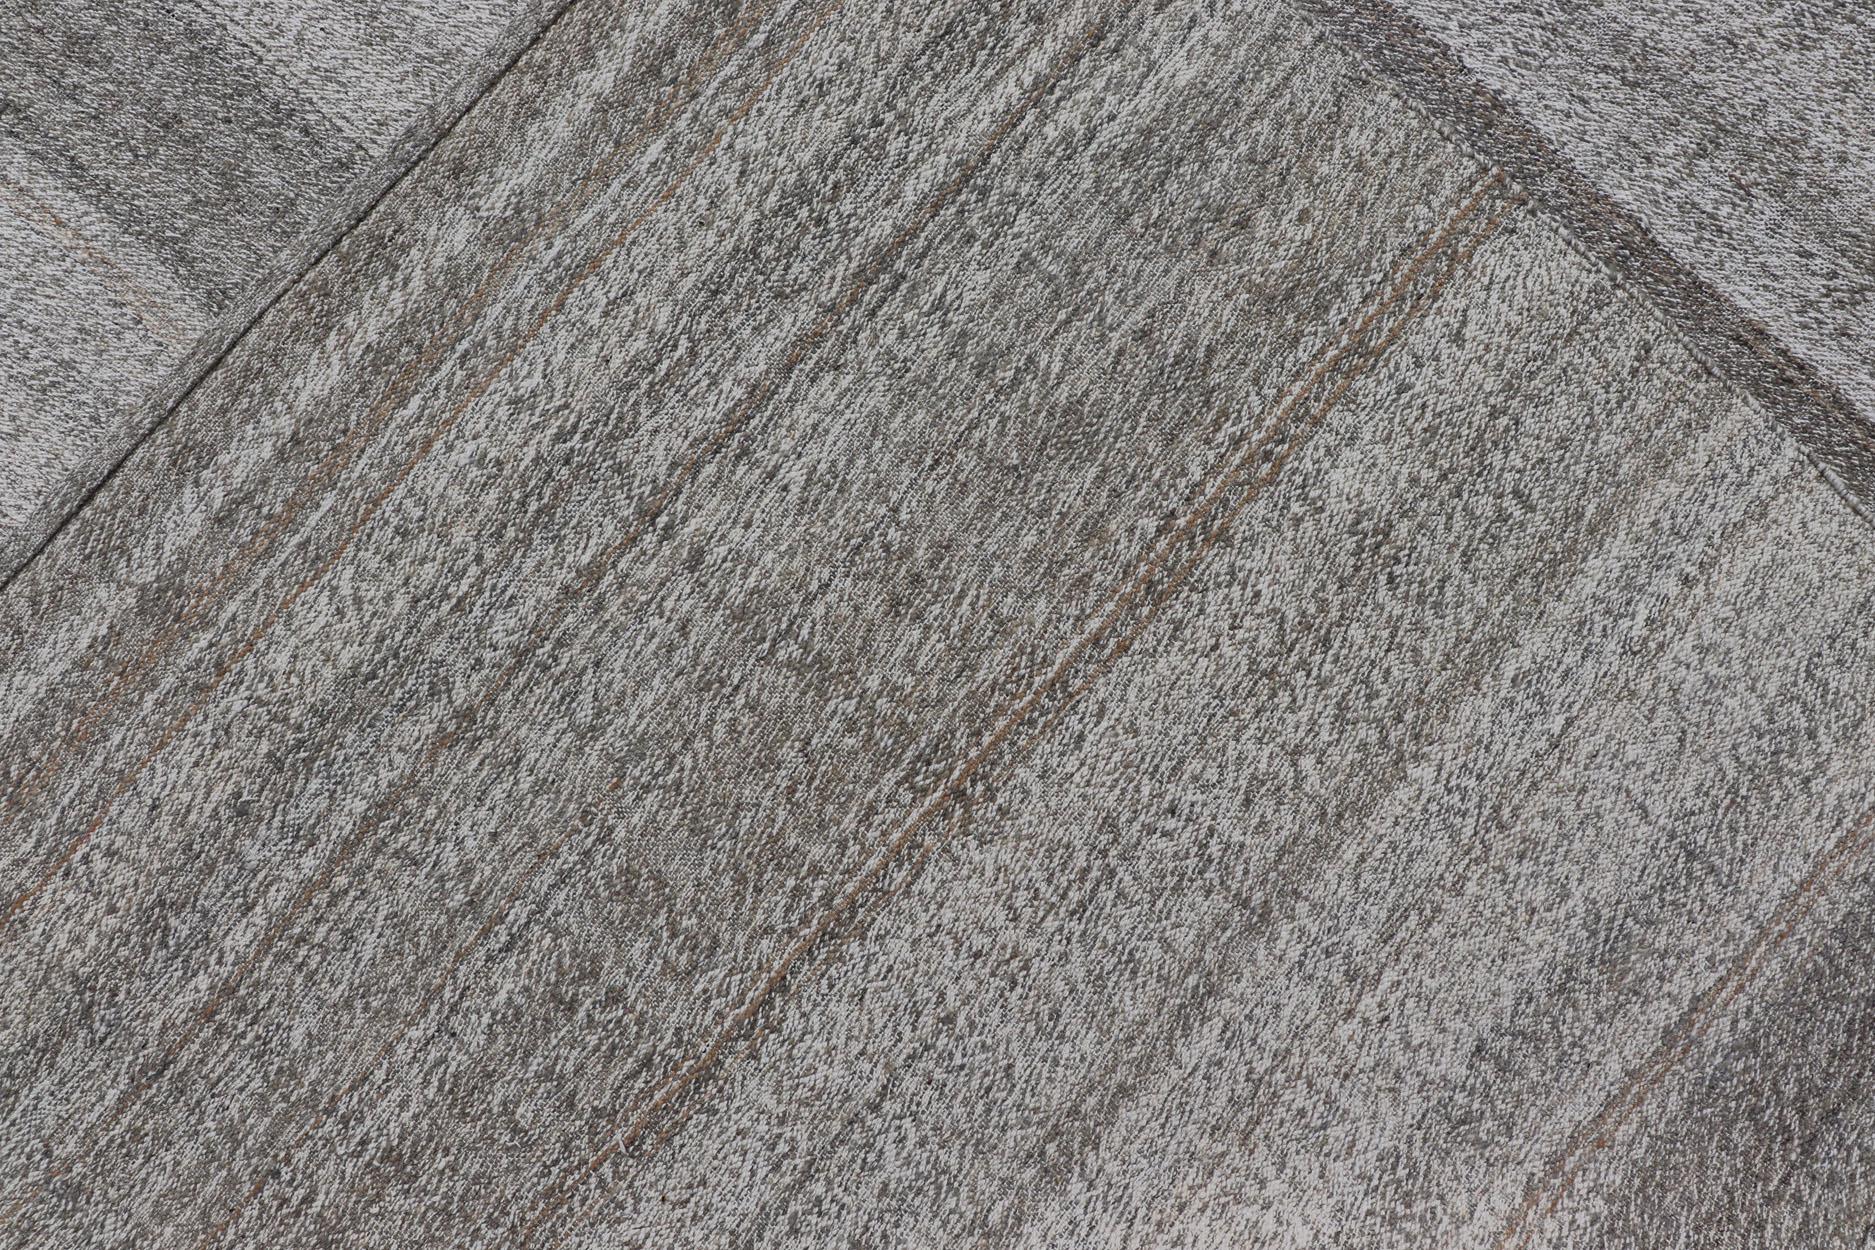  Modern Kilim Rug with Stripes in Neutral tones Shades of Gray  In New Condition For Sale In Atlanta, GA